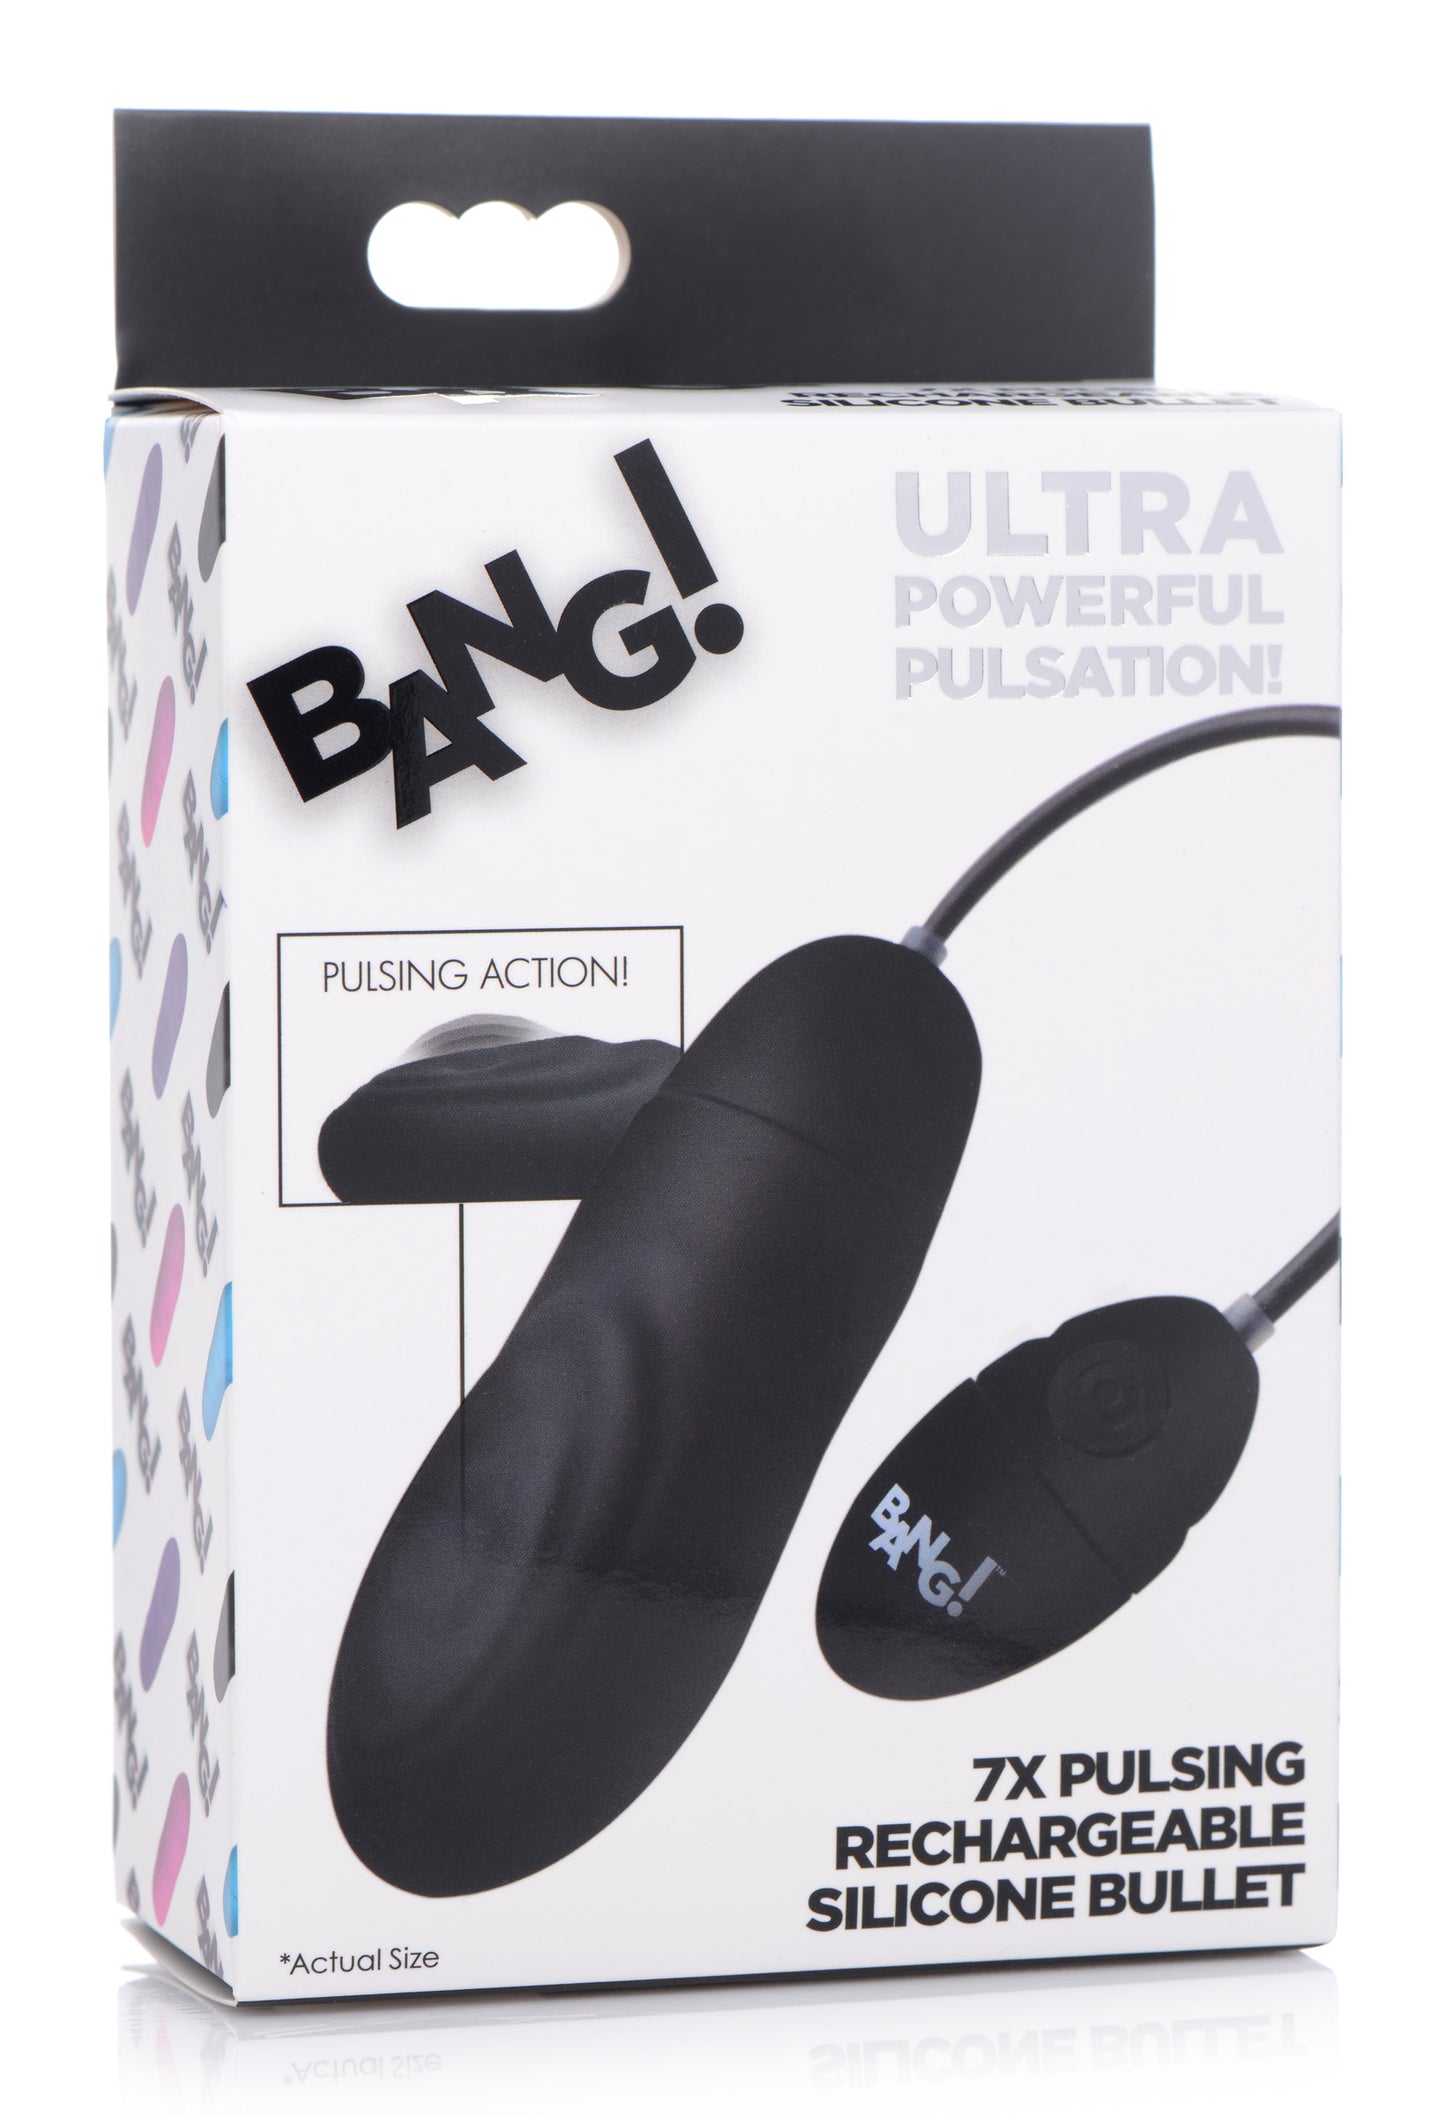 7x Pulsing Rechargeable Silicone Vibrator - Black